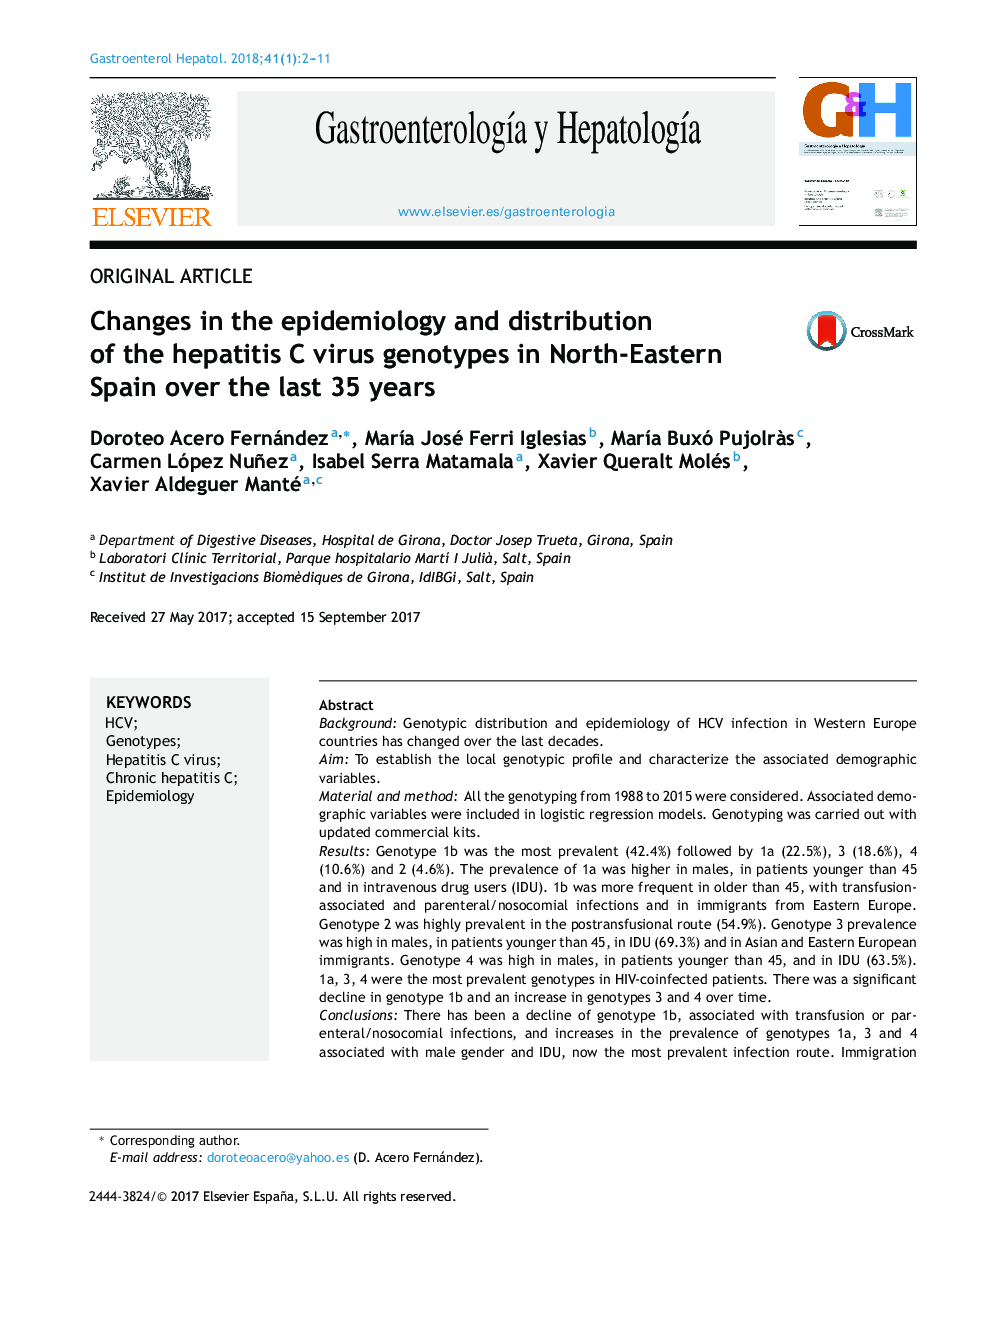 Changes in the epidemiology and distribution of the hepatitis C virus genotypes in North-Eastern Spain over the last 35 years